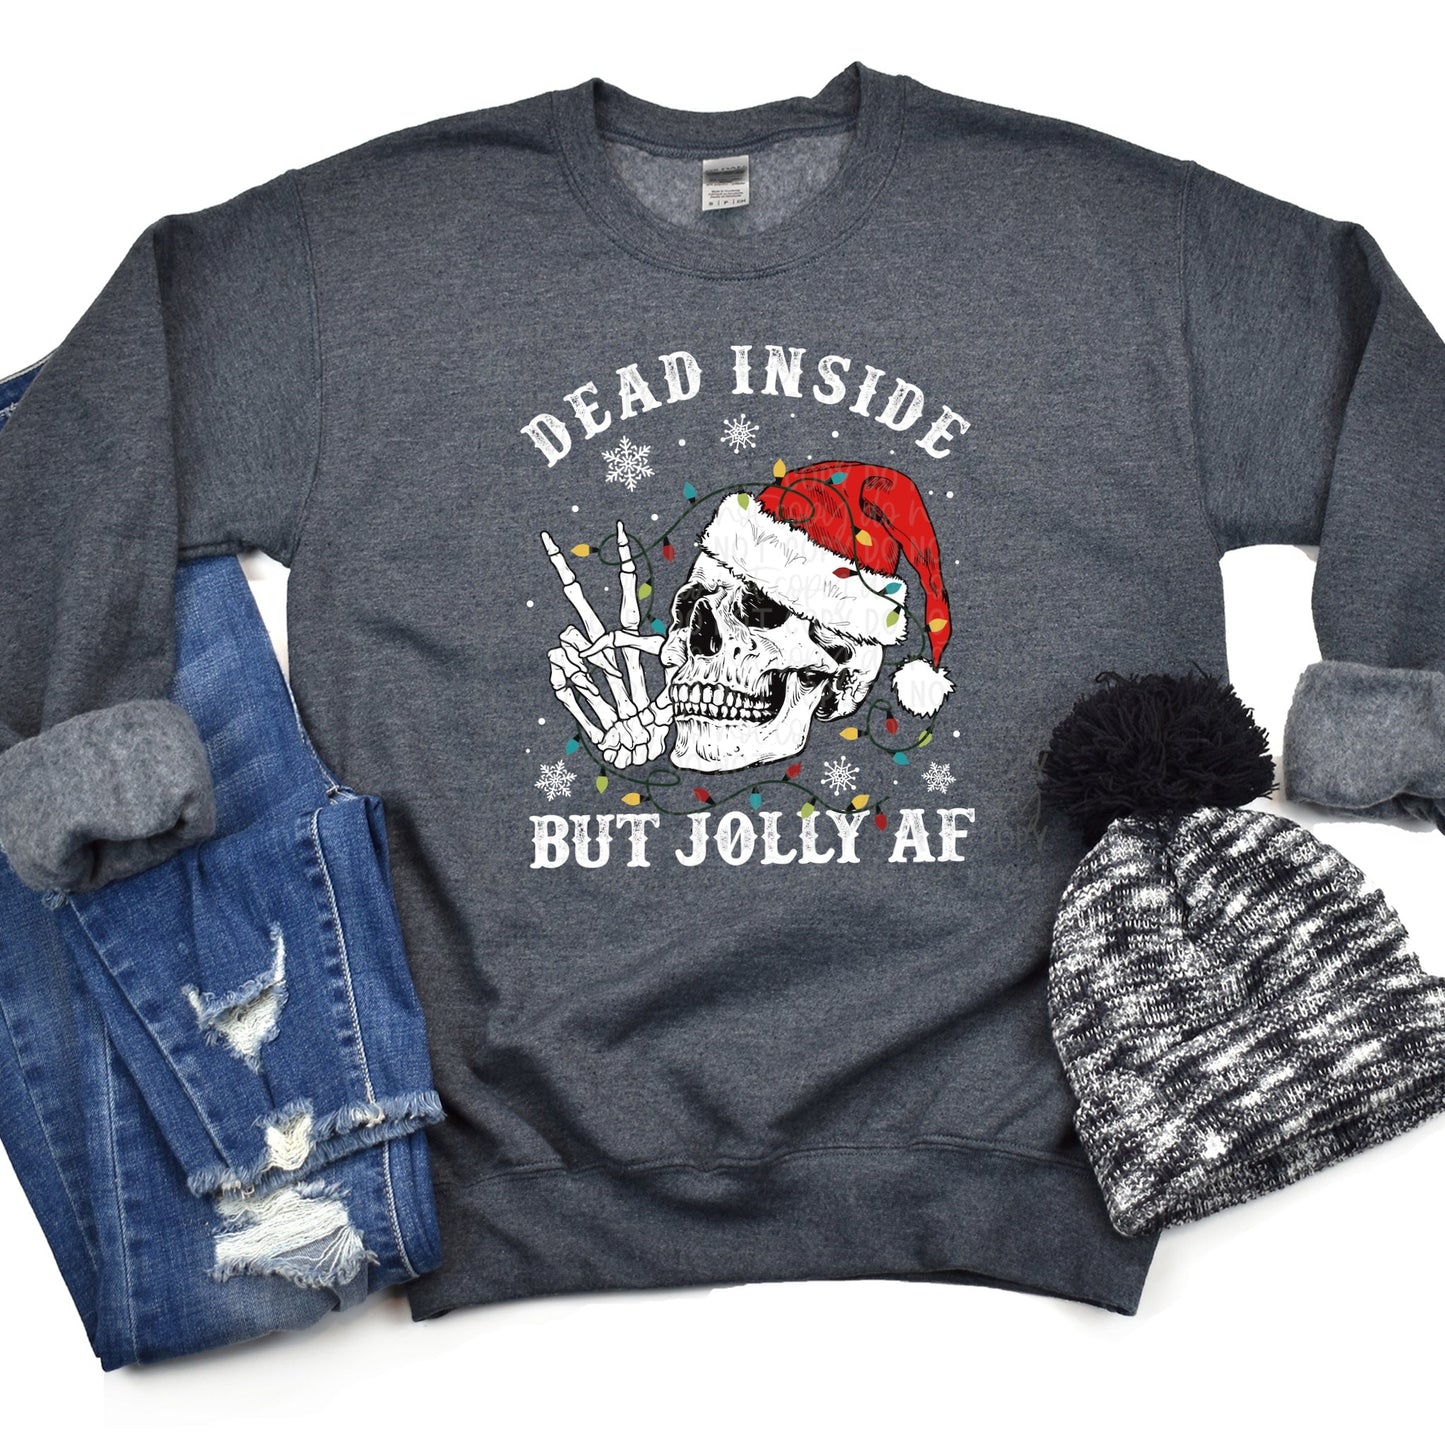 Dead Inside But Jolly AF Heather Charcoal Sweatshirt (White text)